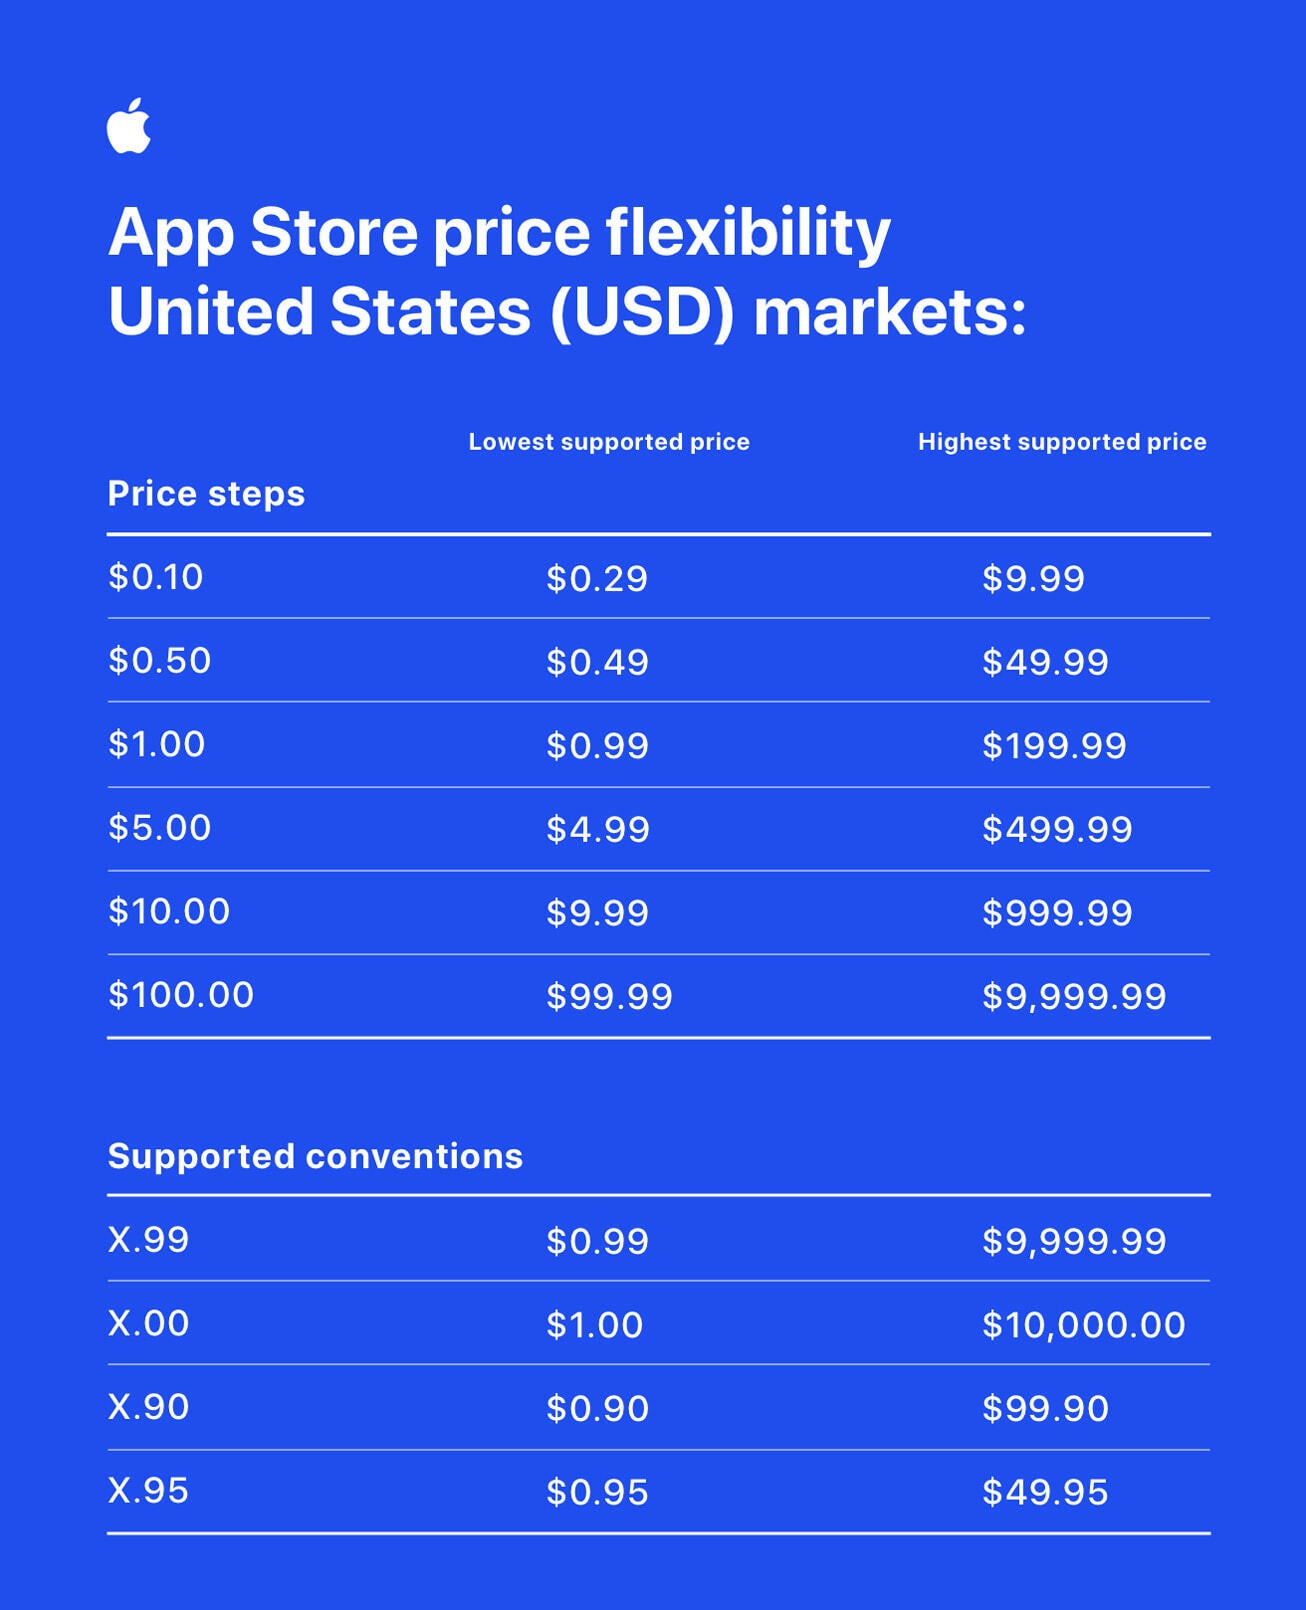 Apple announced new pricing flexibility for the App Store - Apple makes big changes to App Store pricing and adds 700 new price points